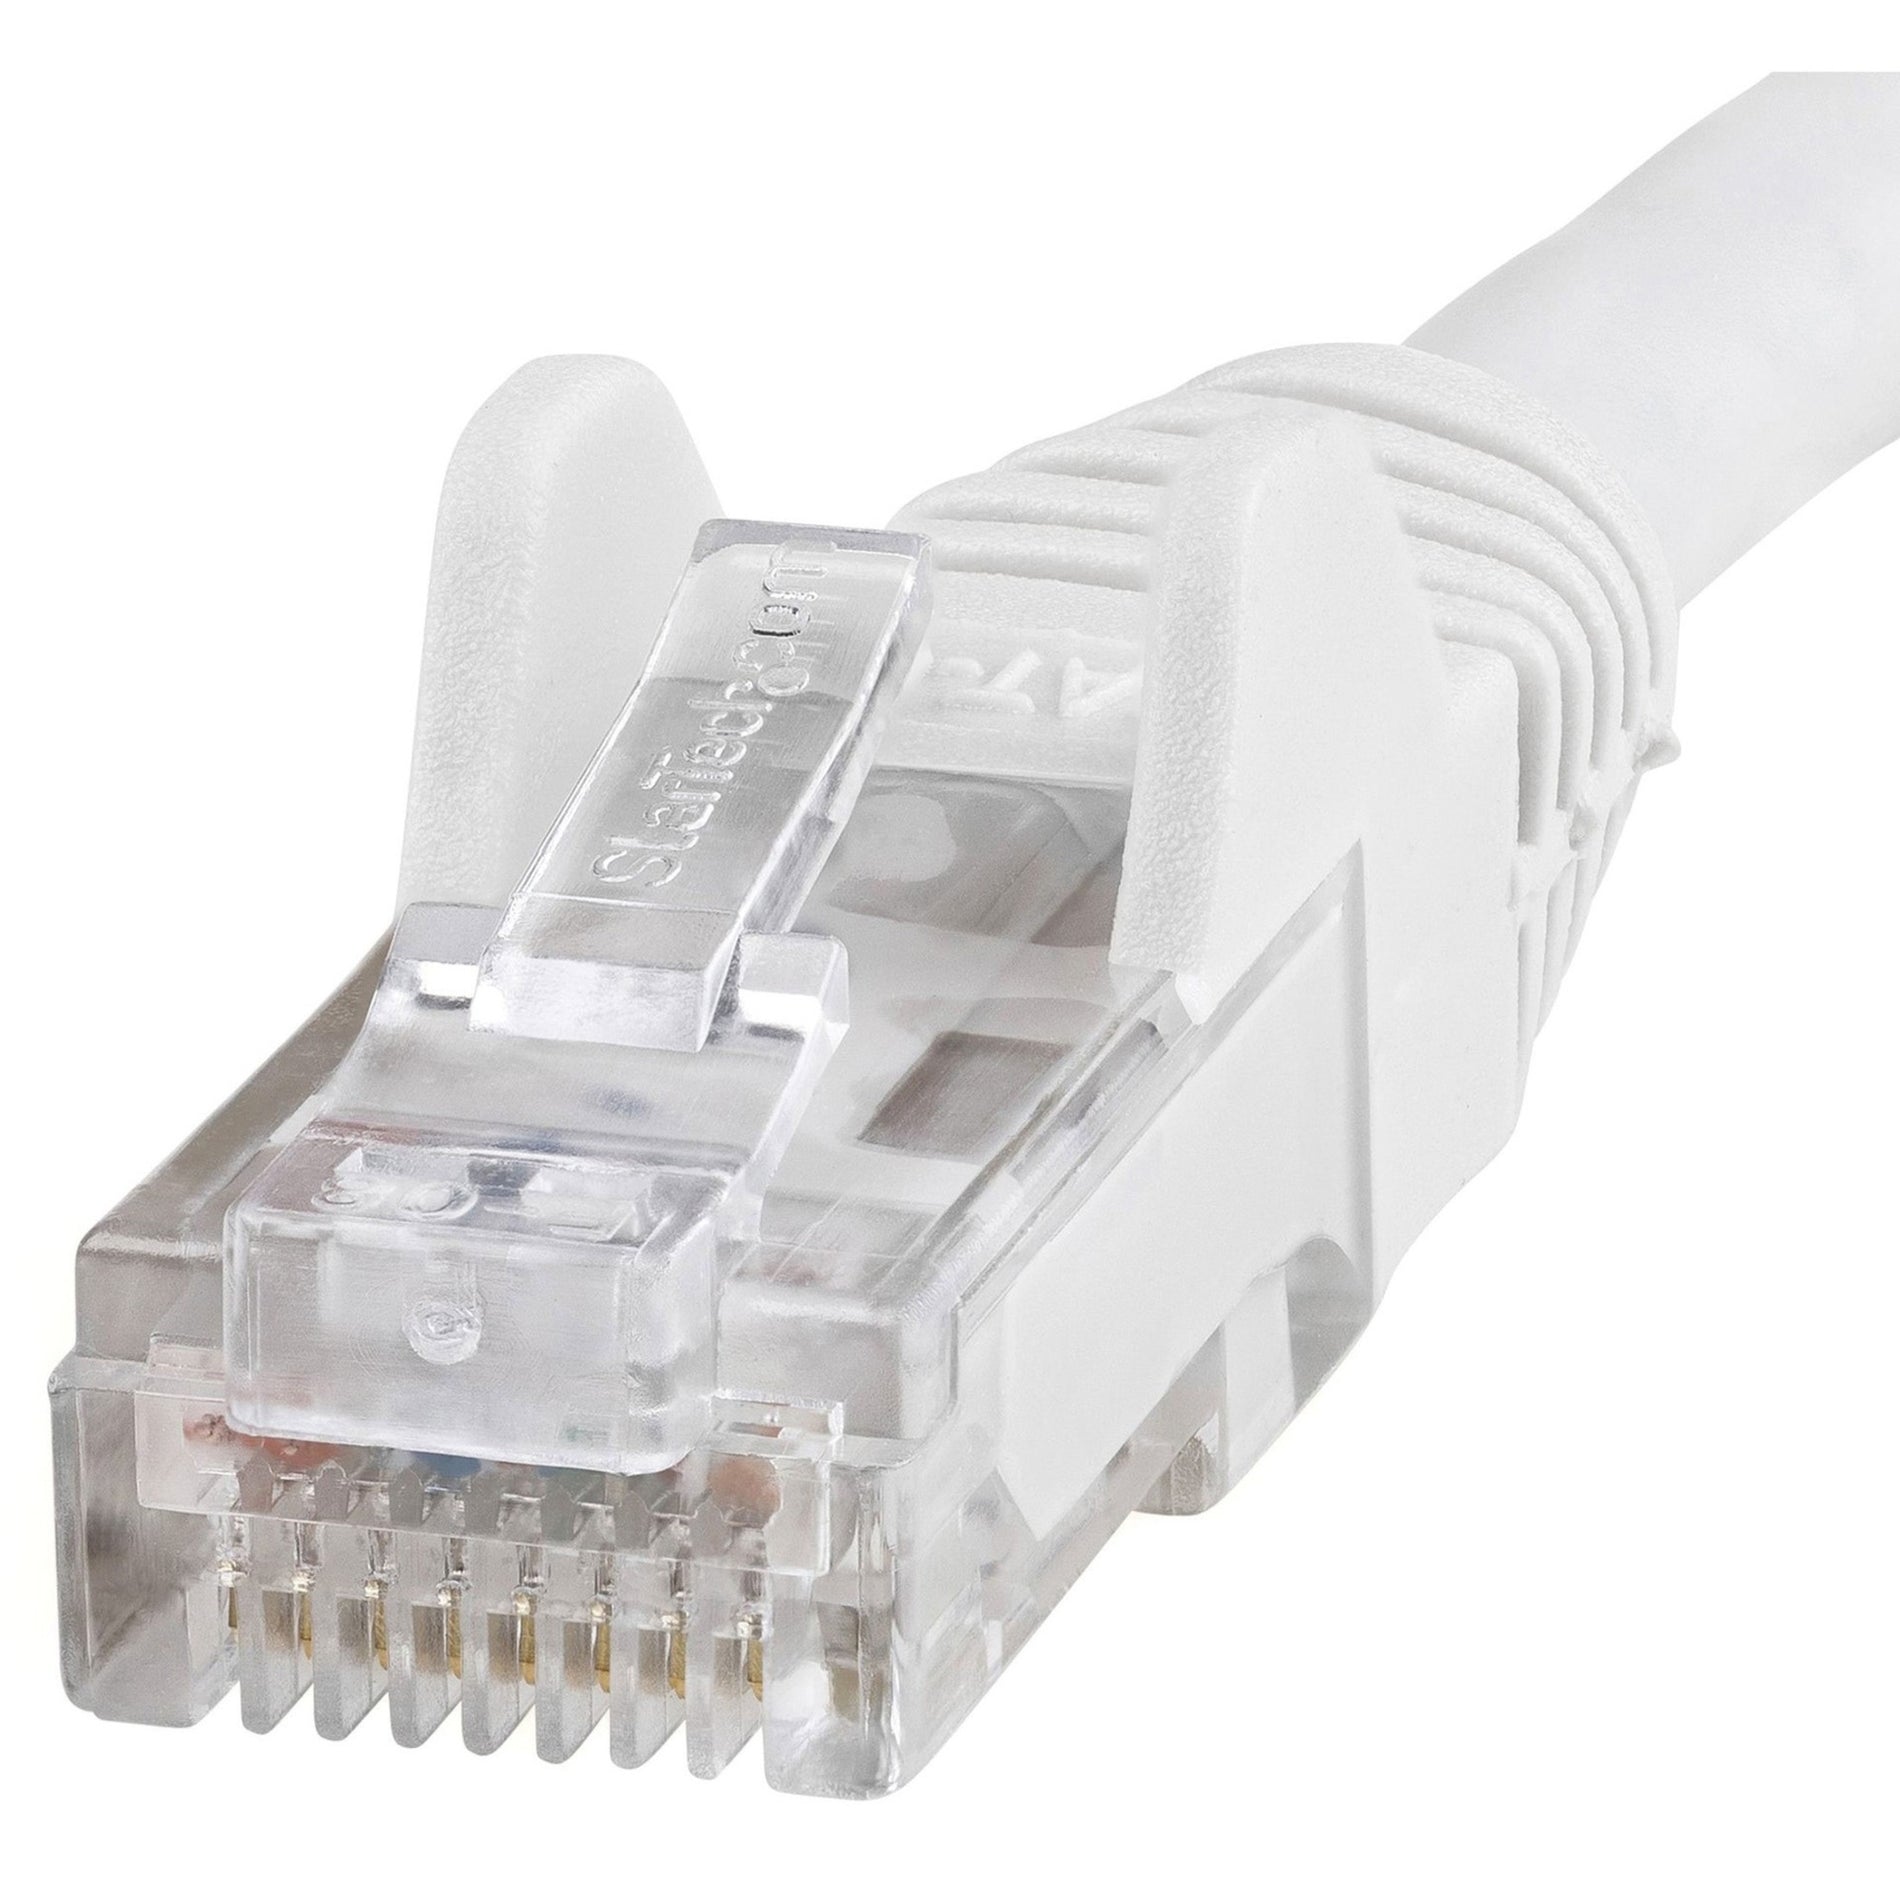 StarTech.com N6PATCH25WH 25 ft White Snagless Cat6 UTP Patch Cable, 10 Gbit/s Data Transfer Rate, Lifetime Warranty